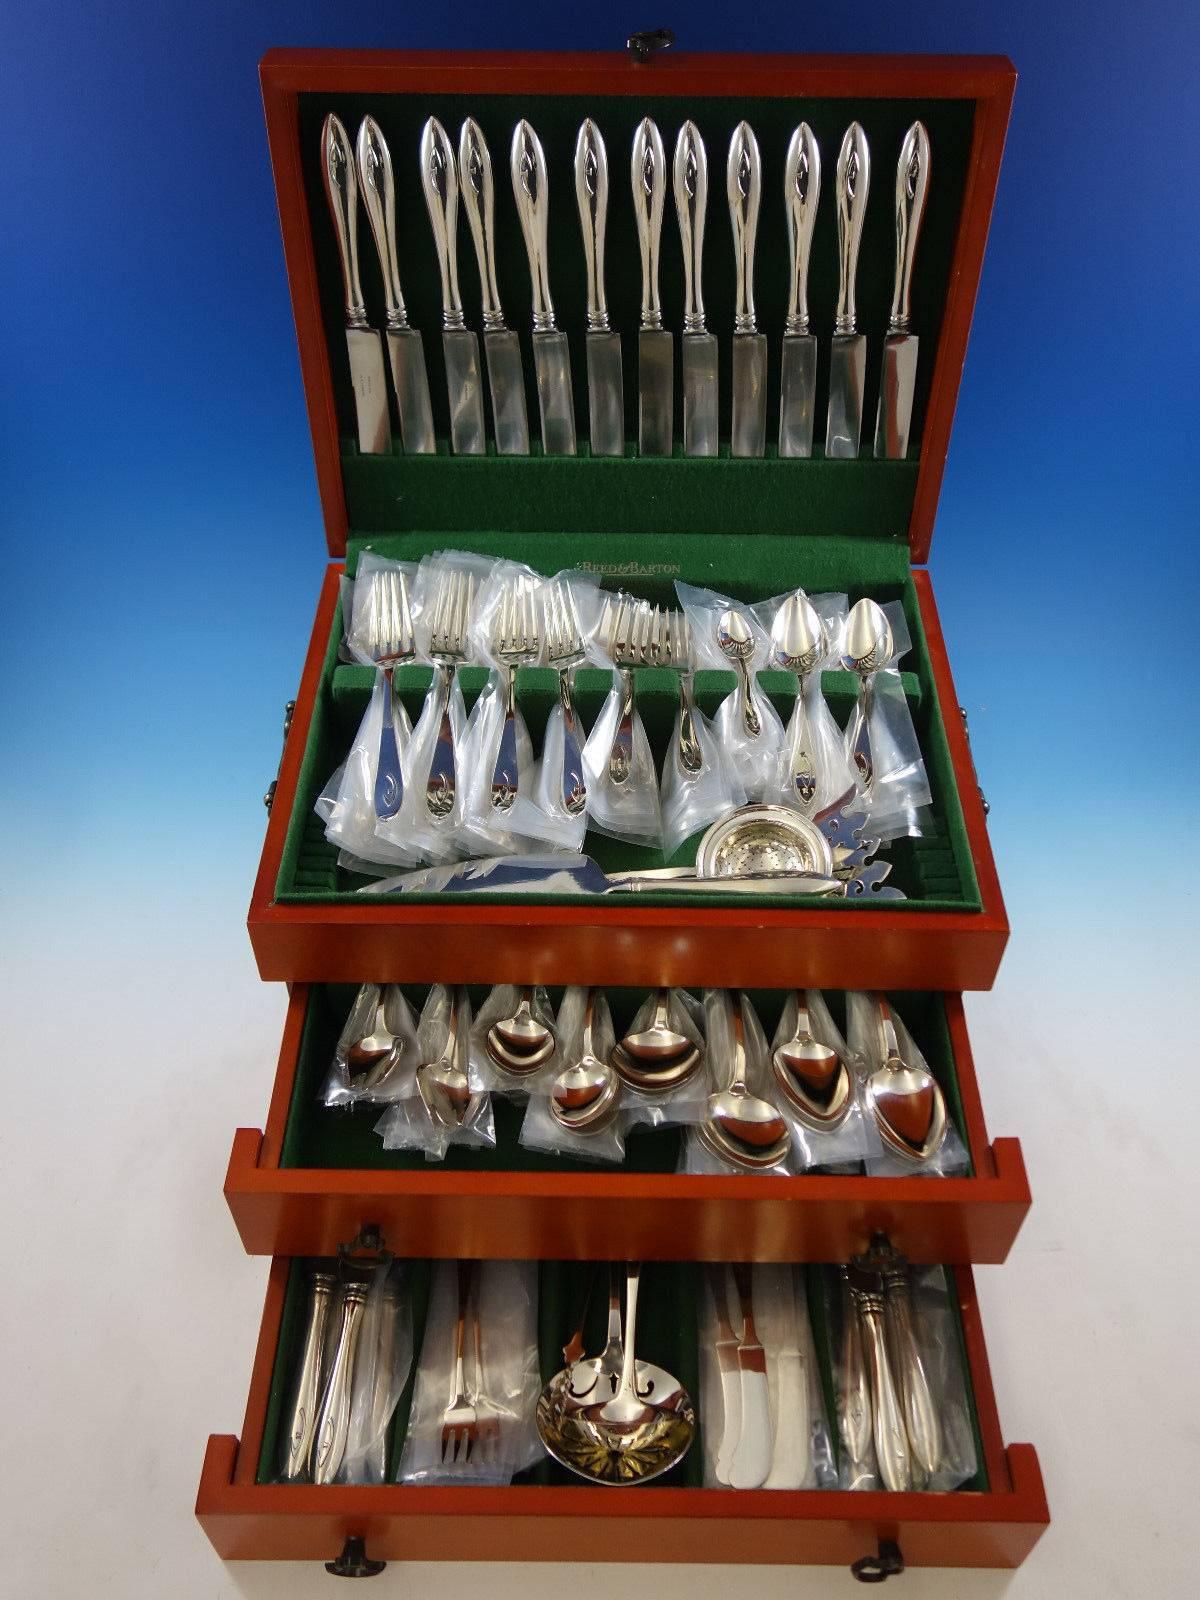 Exceptional dinner & luncheon Arts & Crafts BUCKINGHAM NARROW, sterling silver flatware set, 162 Pieces. This pattern is by  BY SHREVE & CO. of San Francisco, circa 1915. This set includes: 

12 DINNER SIZE KNIVES, 9 7/8